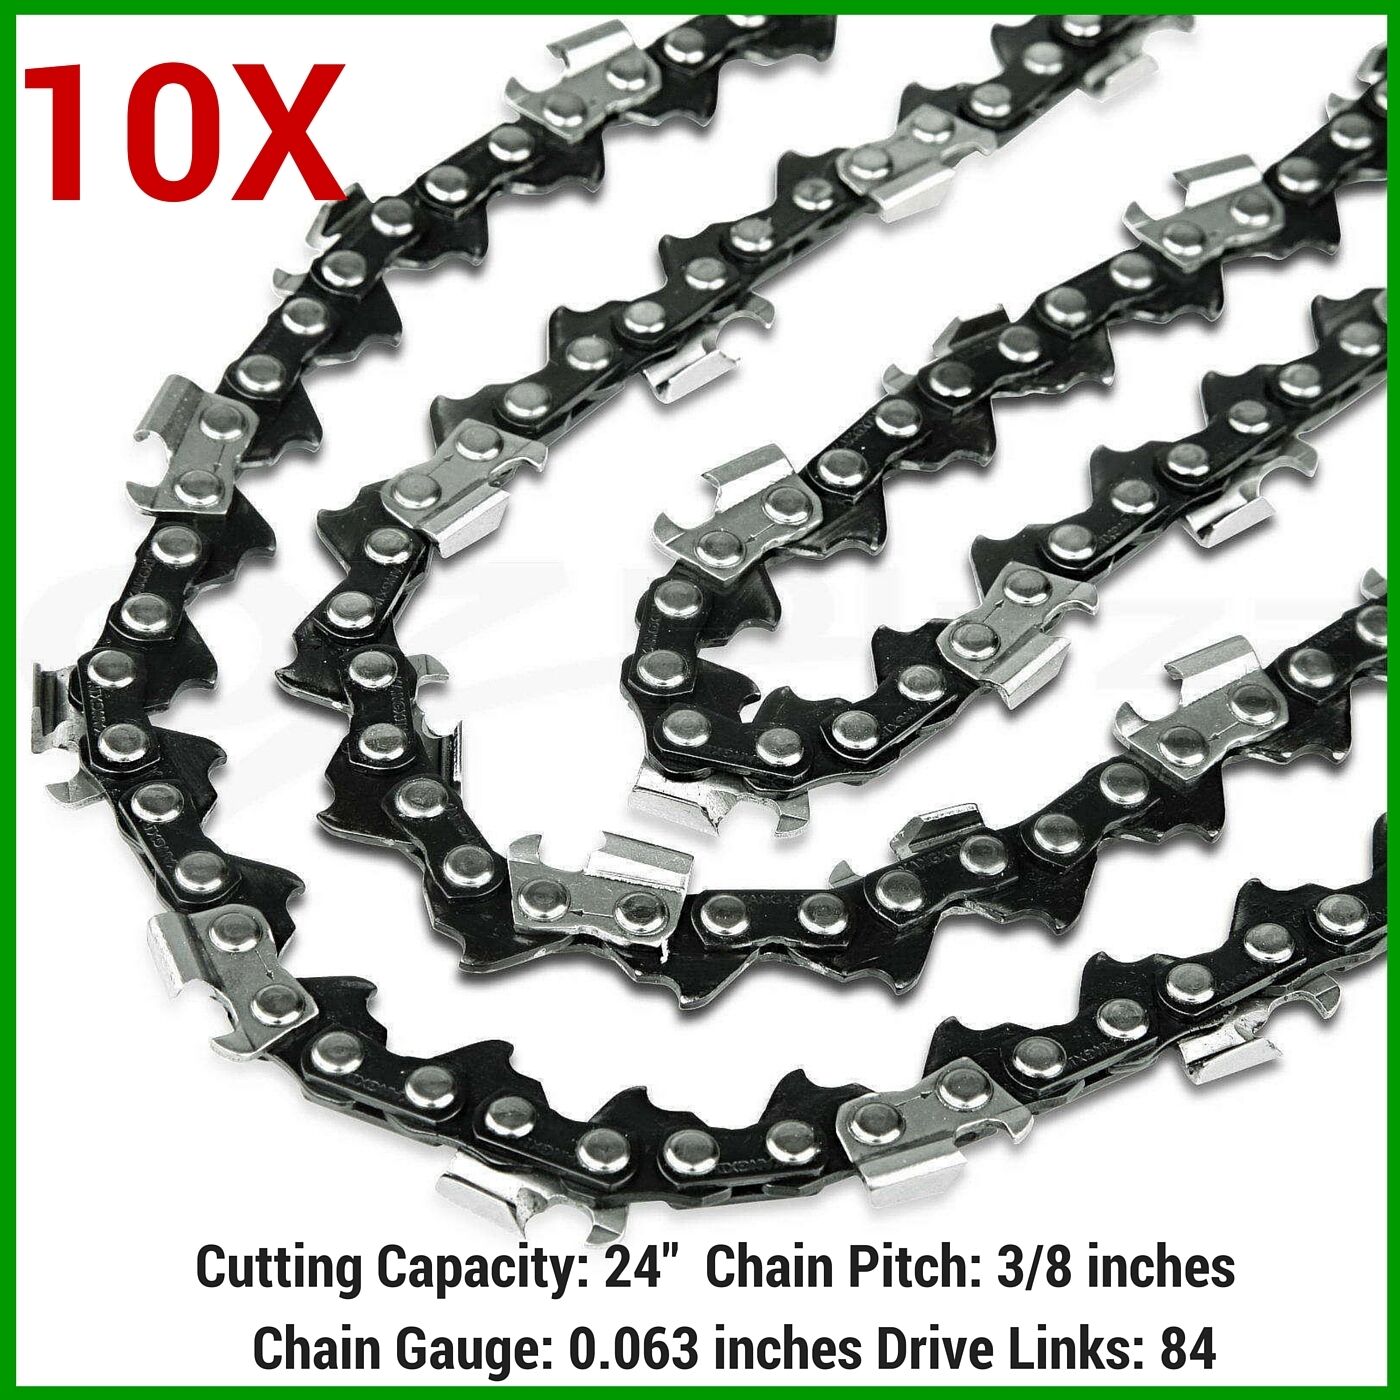 10XChainsaw Chain New 24" x 84 D,3/8 Pitch,0.063 Gauge Replacement Saws parts